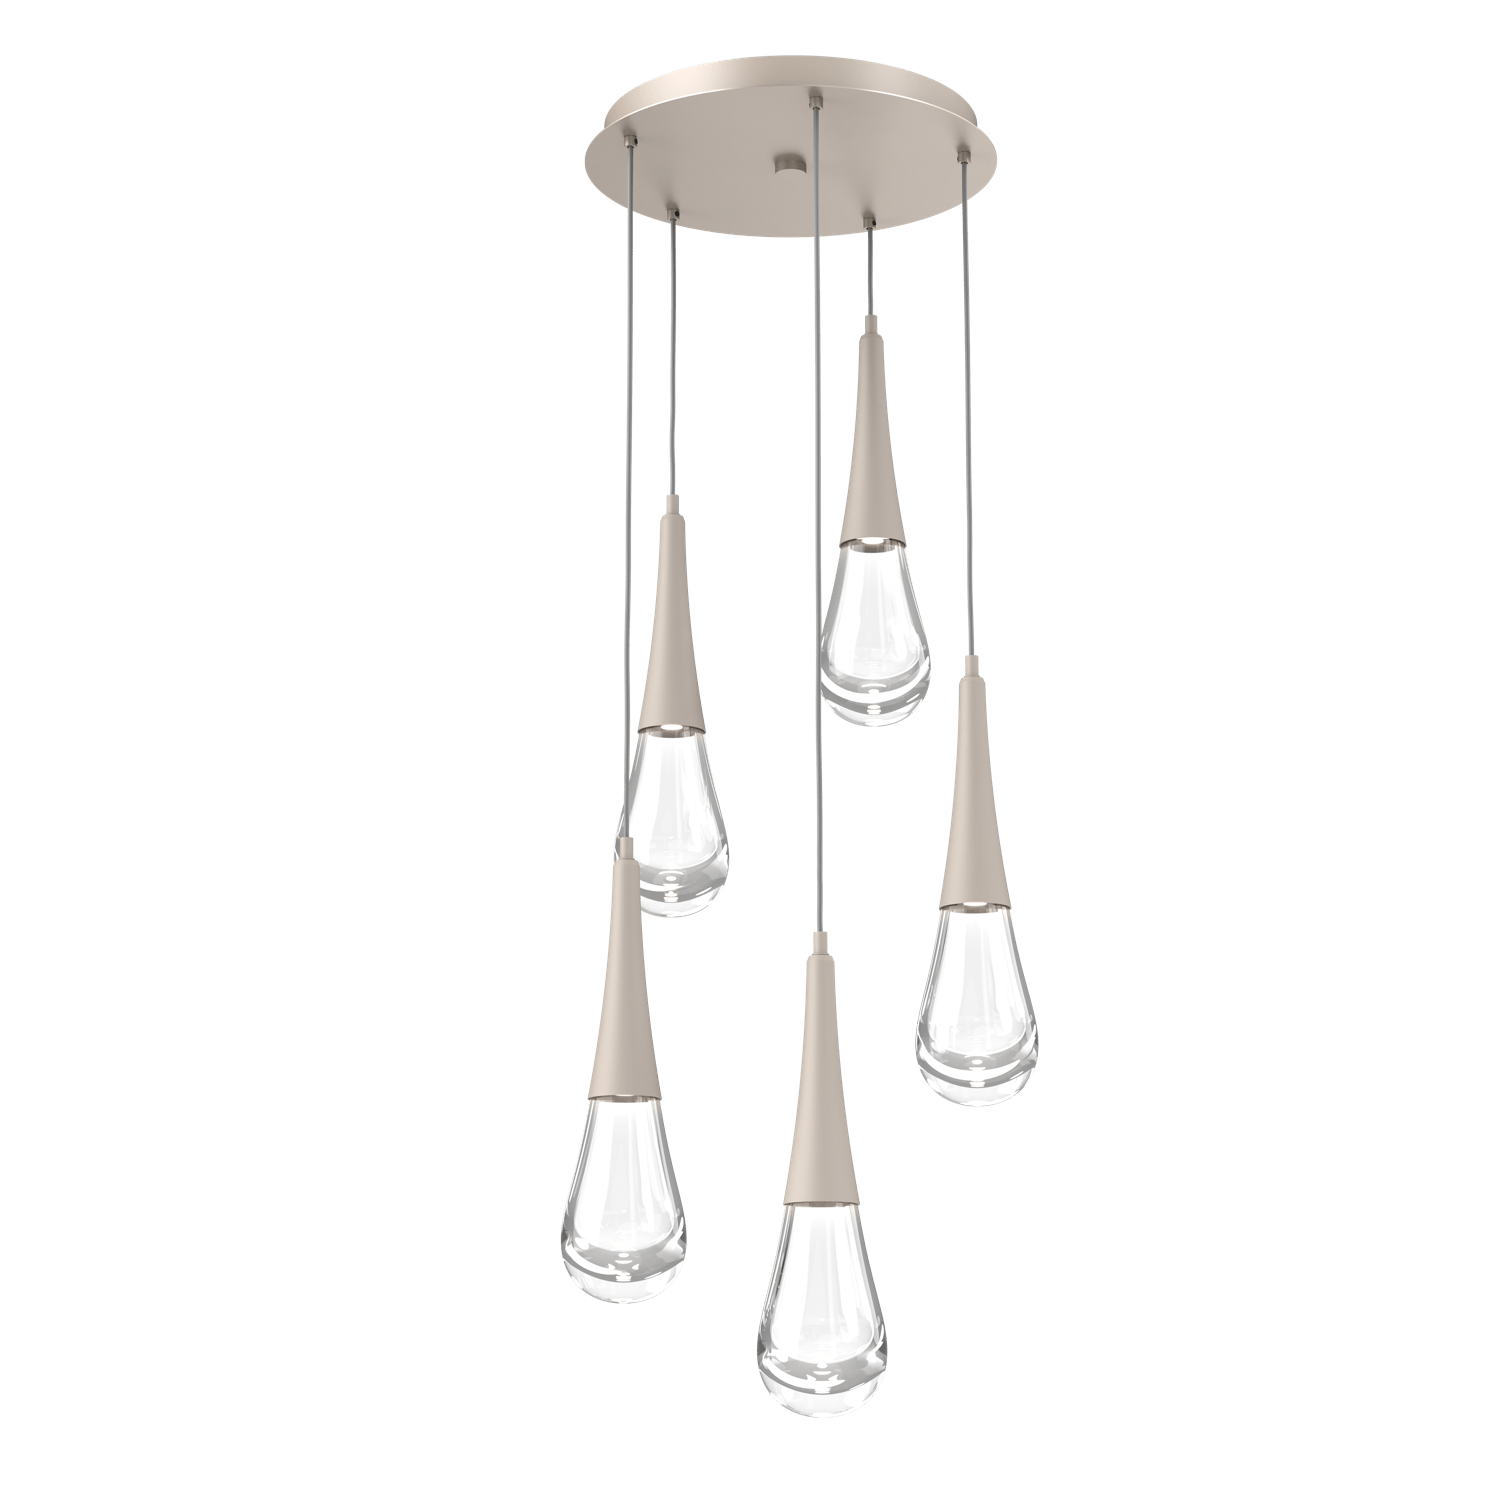 CHB0078-05-BS-Hammerton-Studio-Raindrop-5-light-round-pendant-chandelier-with-metallic-beige-silver-finish-and-clear-blown-glass-shades-and-LED-lamping